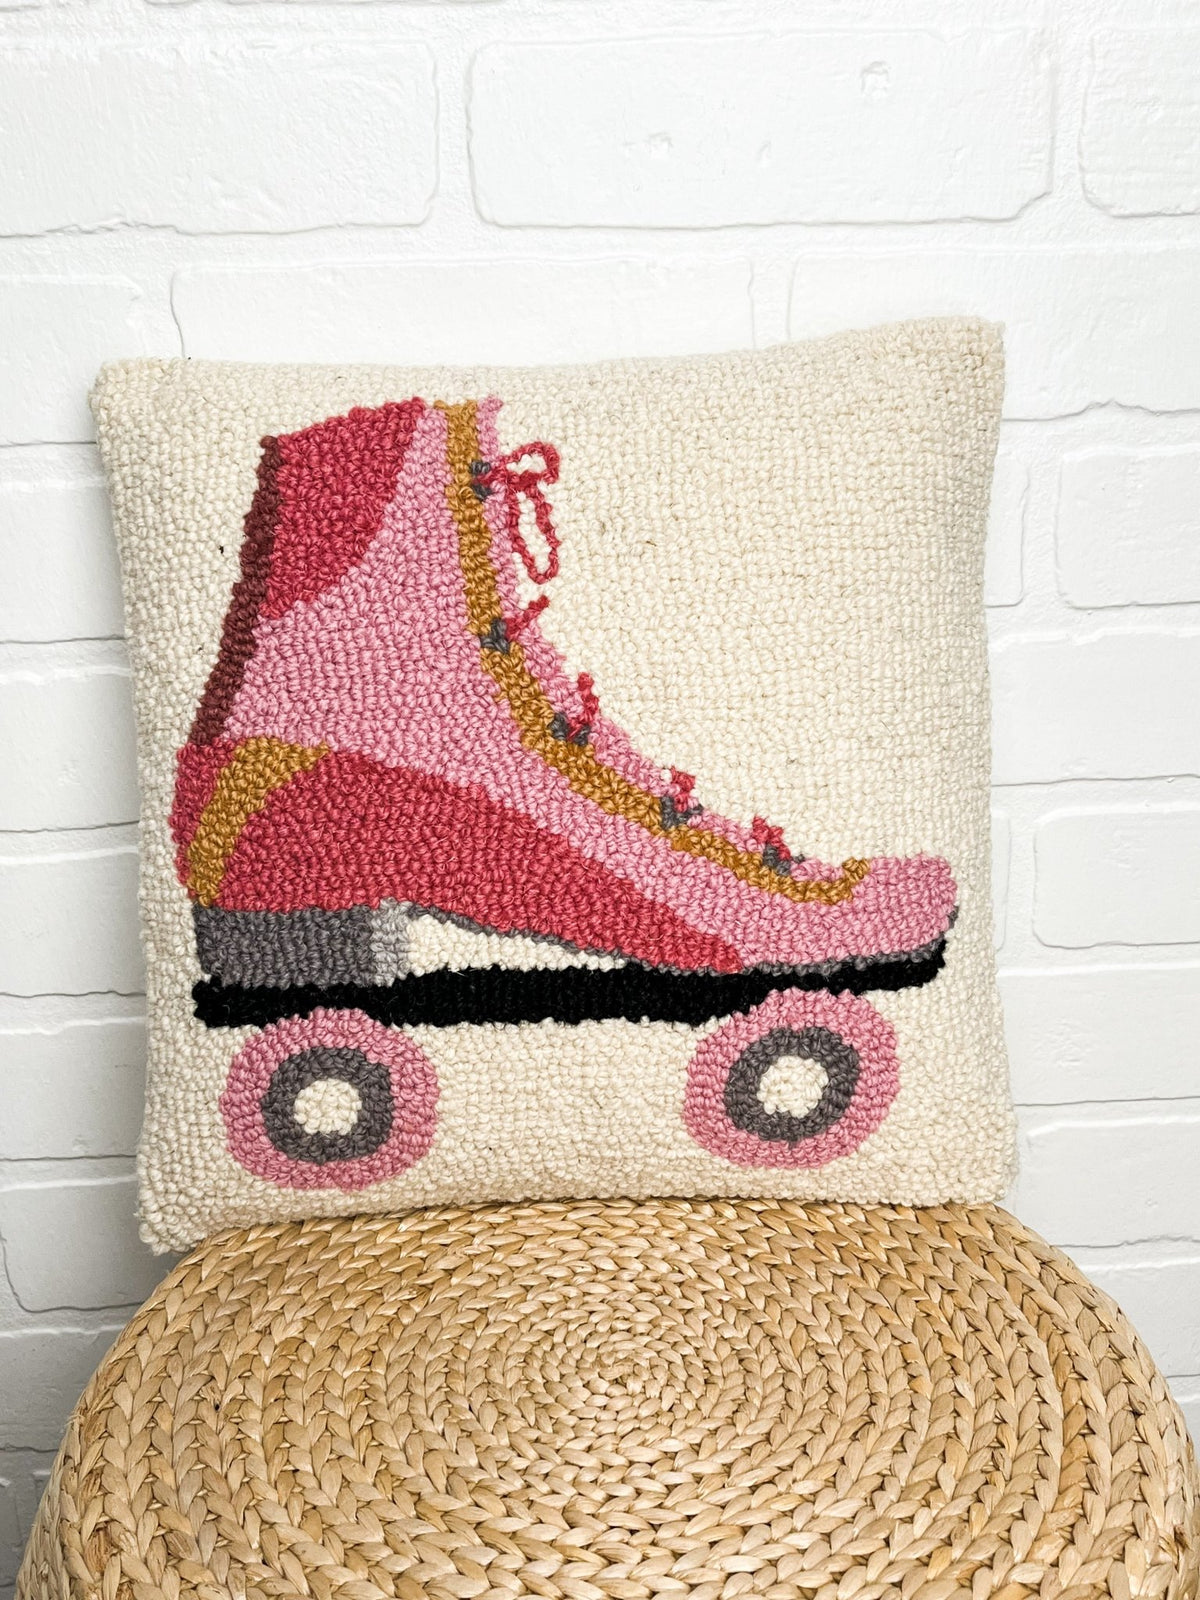 Rollerskate square wool hooked pillow natural - Trendy Gifts at Lush Fashion Lounge Boutique in Oklahoma City